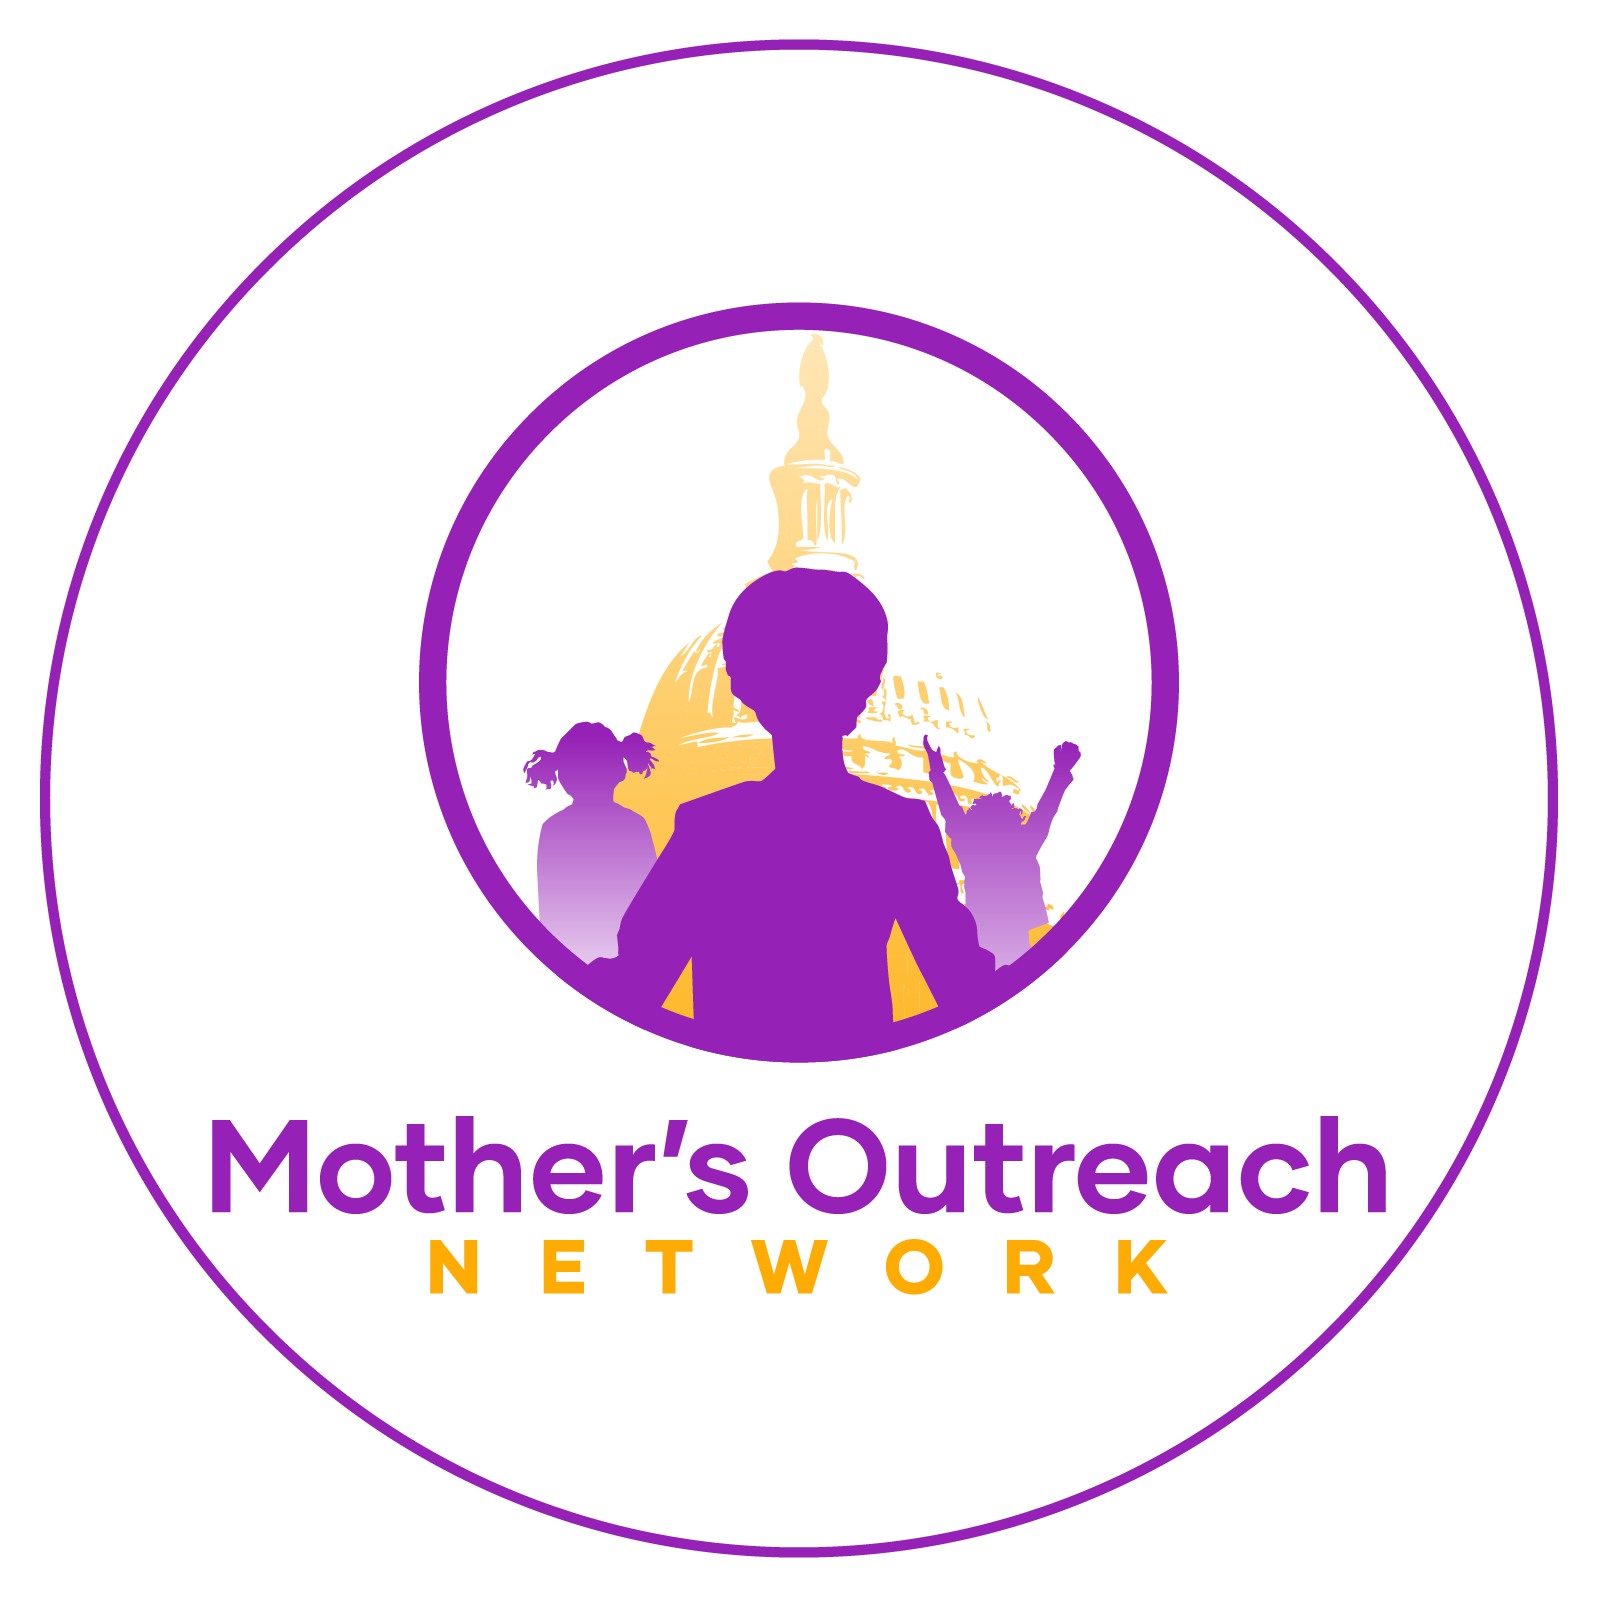 Mother's Outreach Network